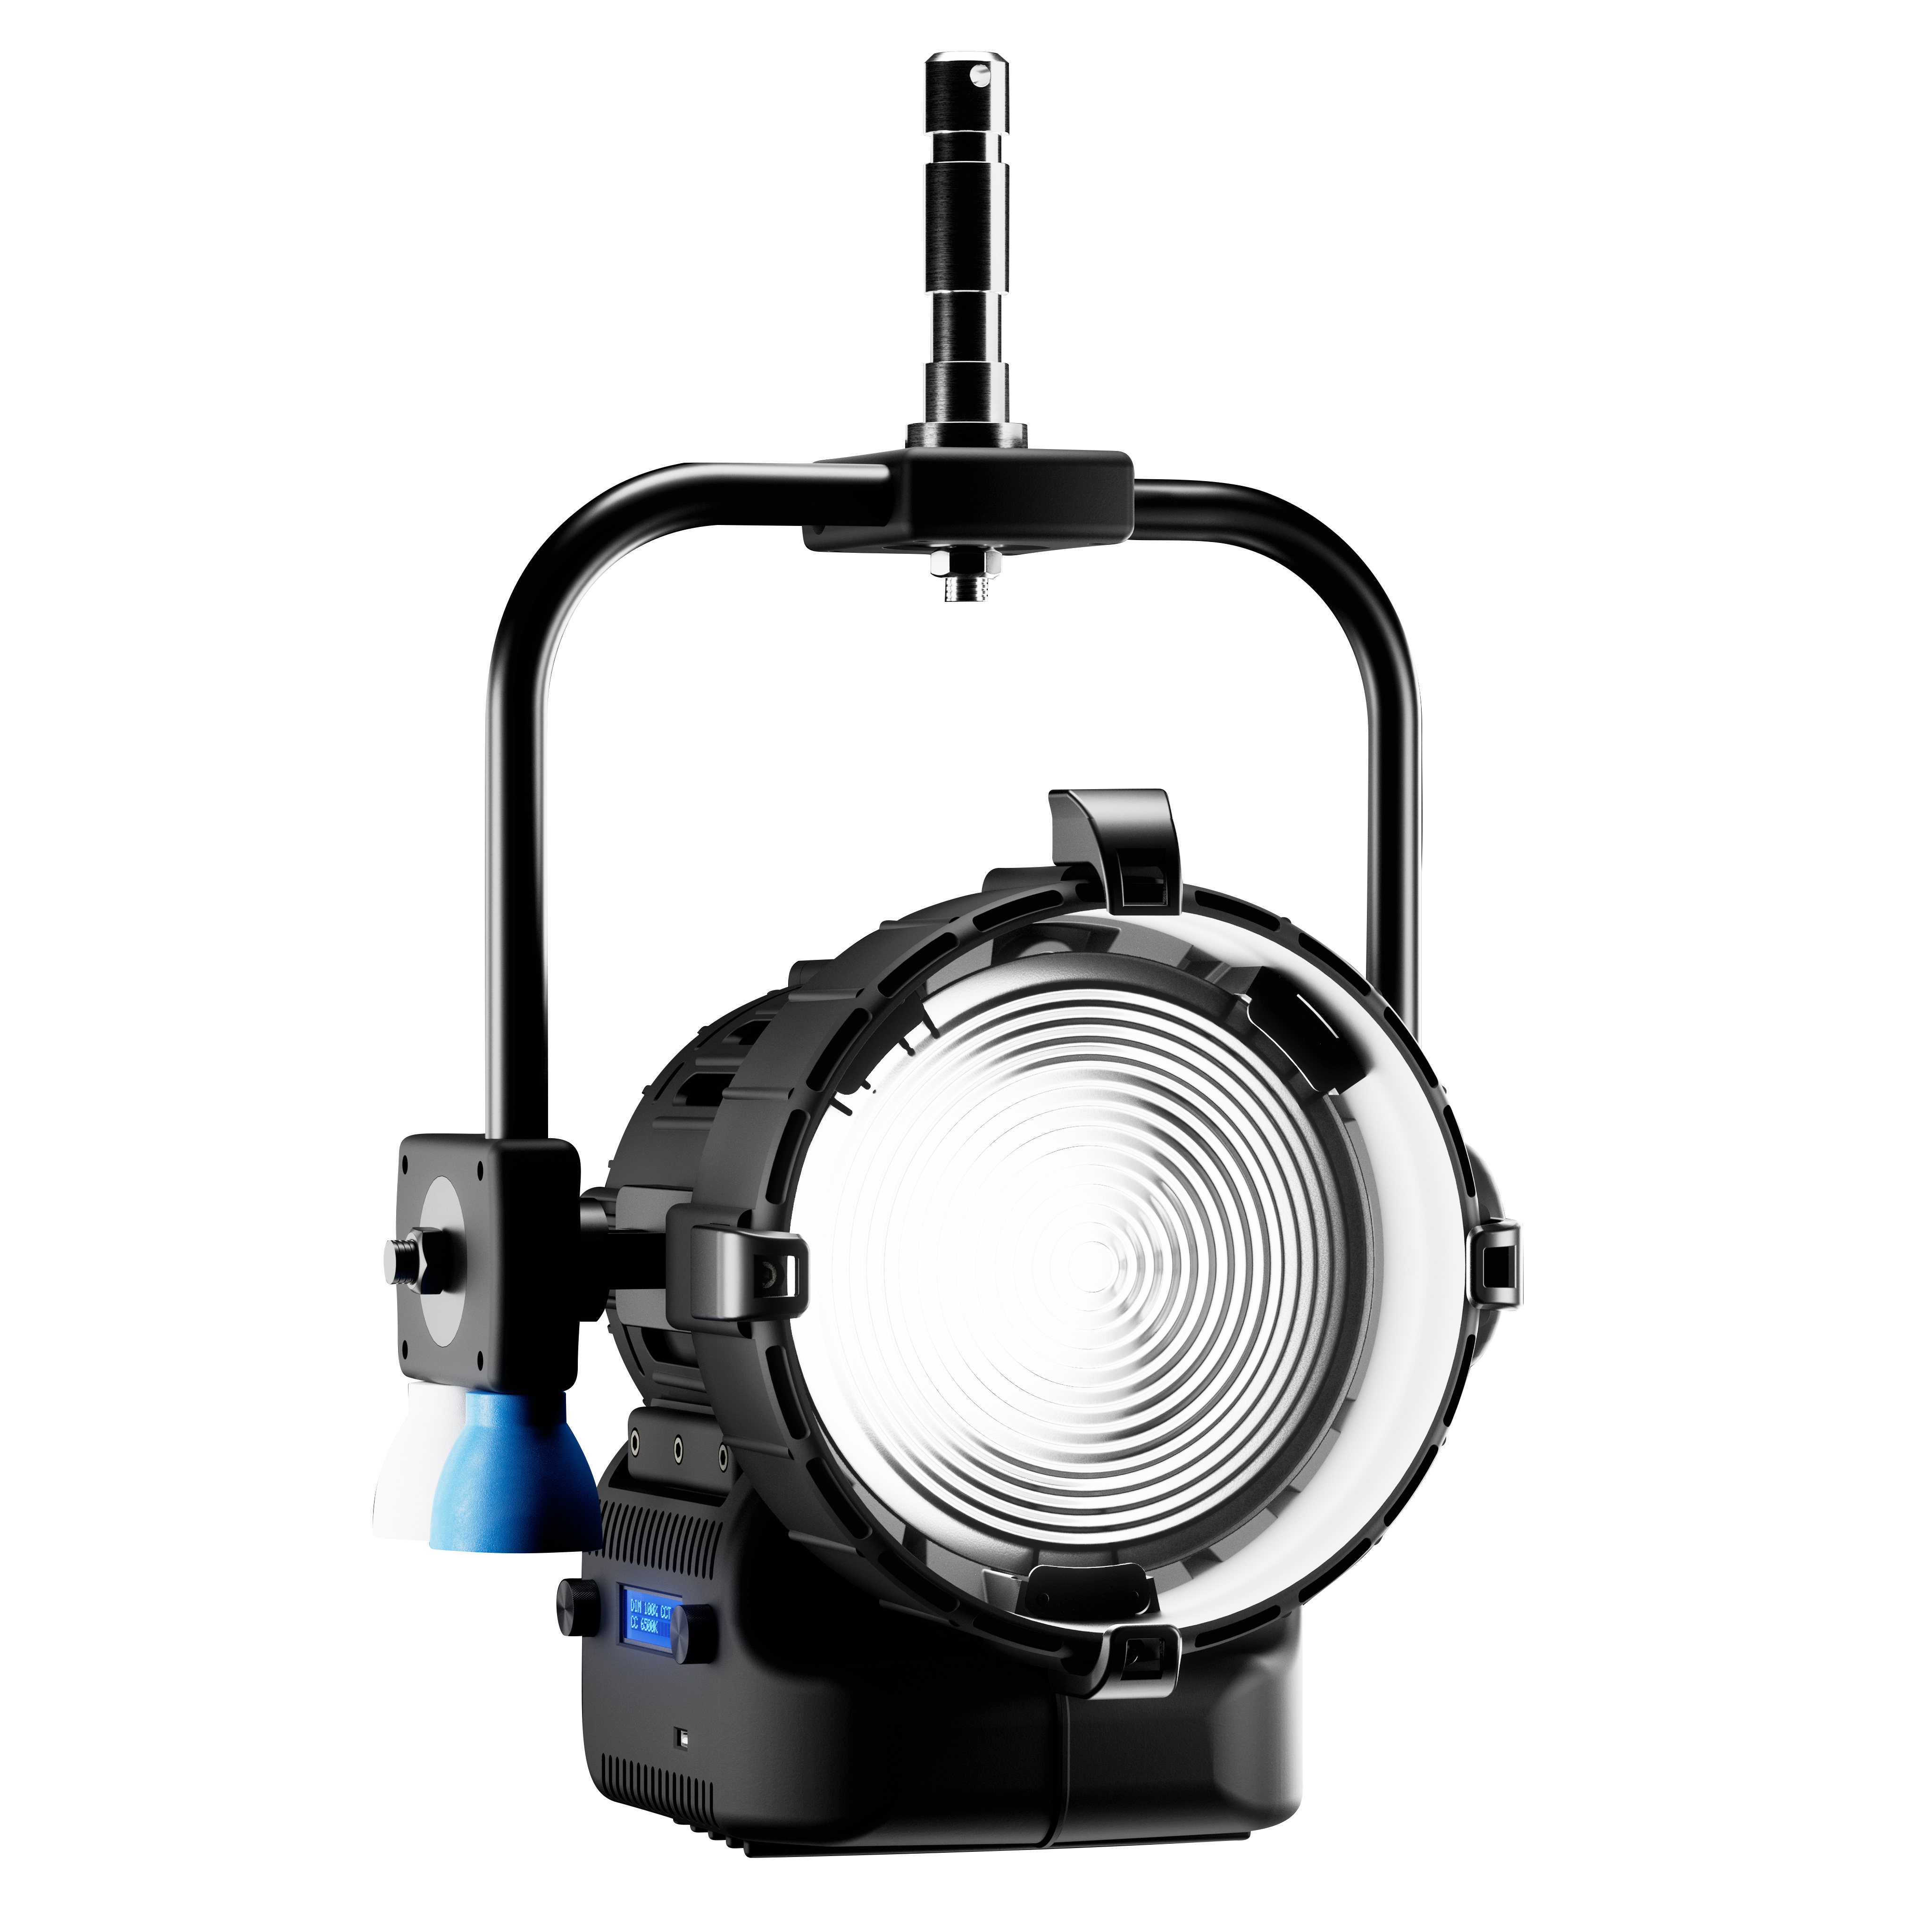 Lupo DayledPRO 2000 Full Colour Fresnel Light (Pole Operated)